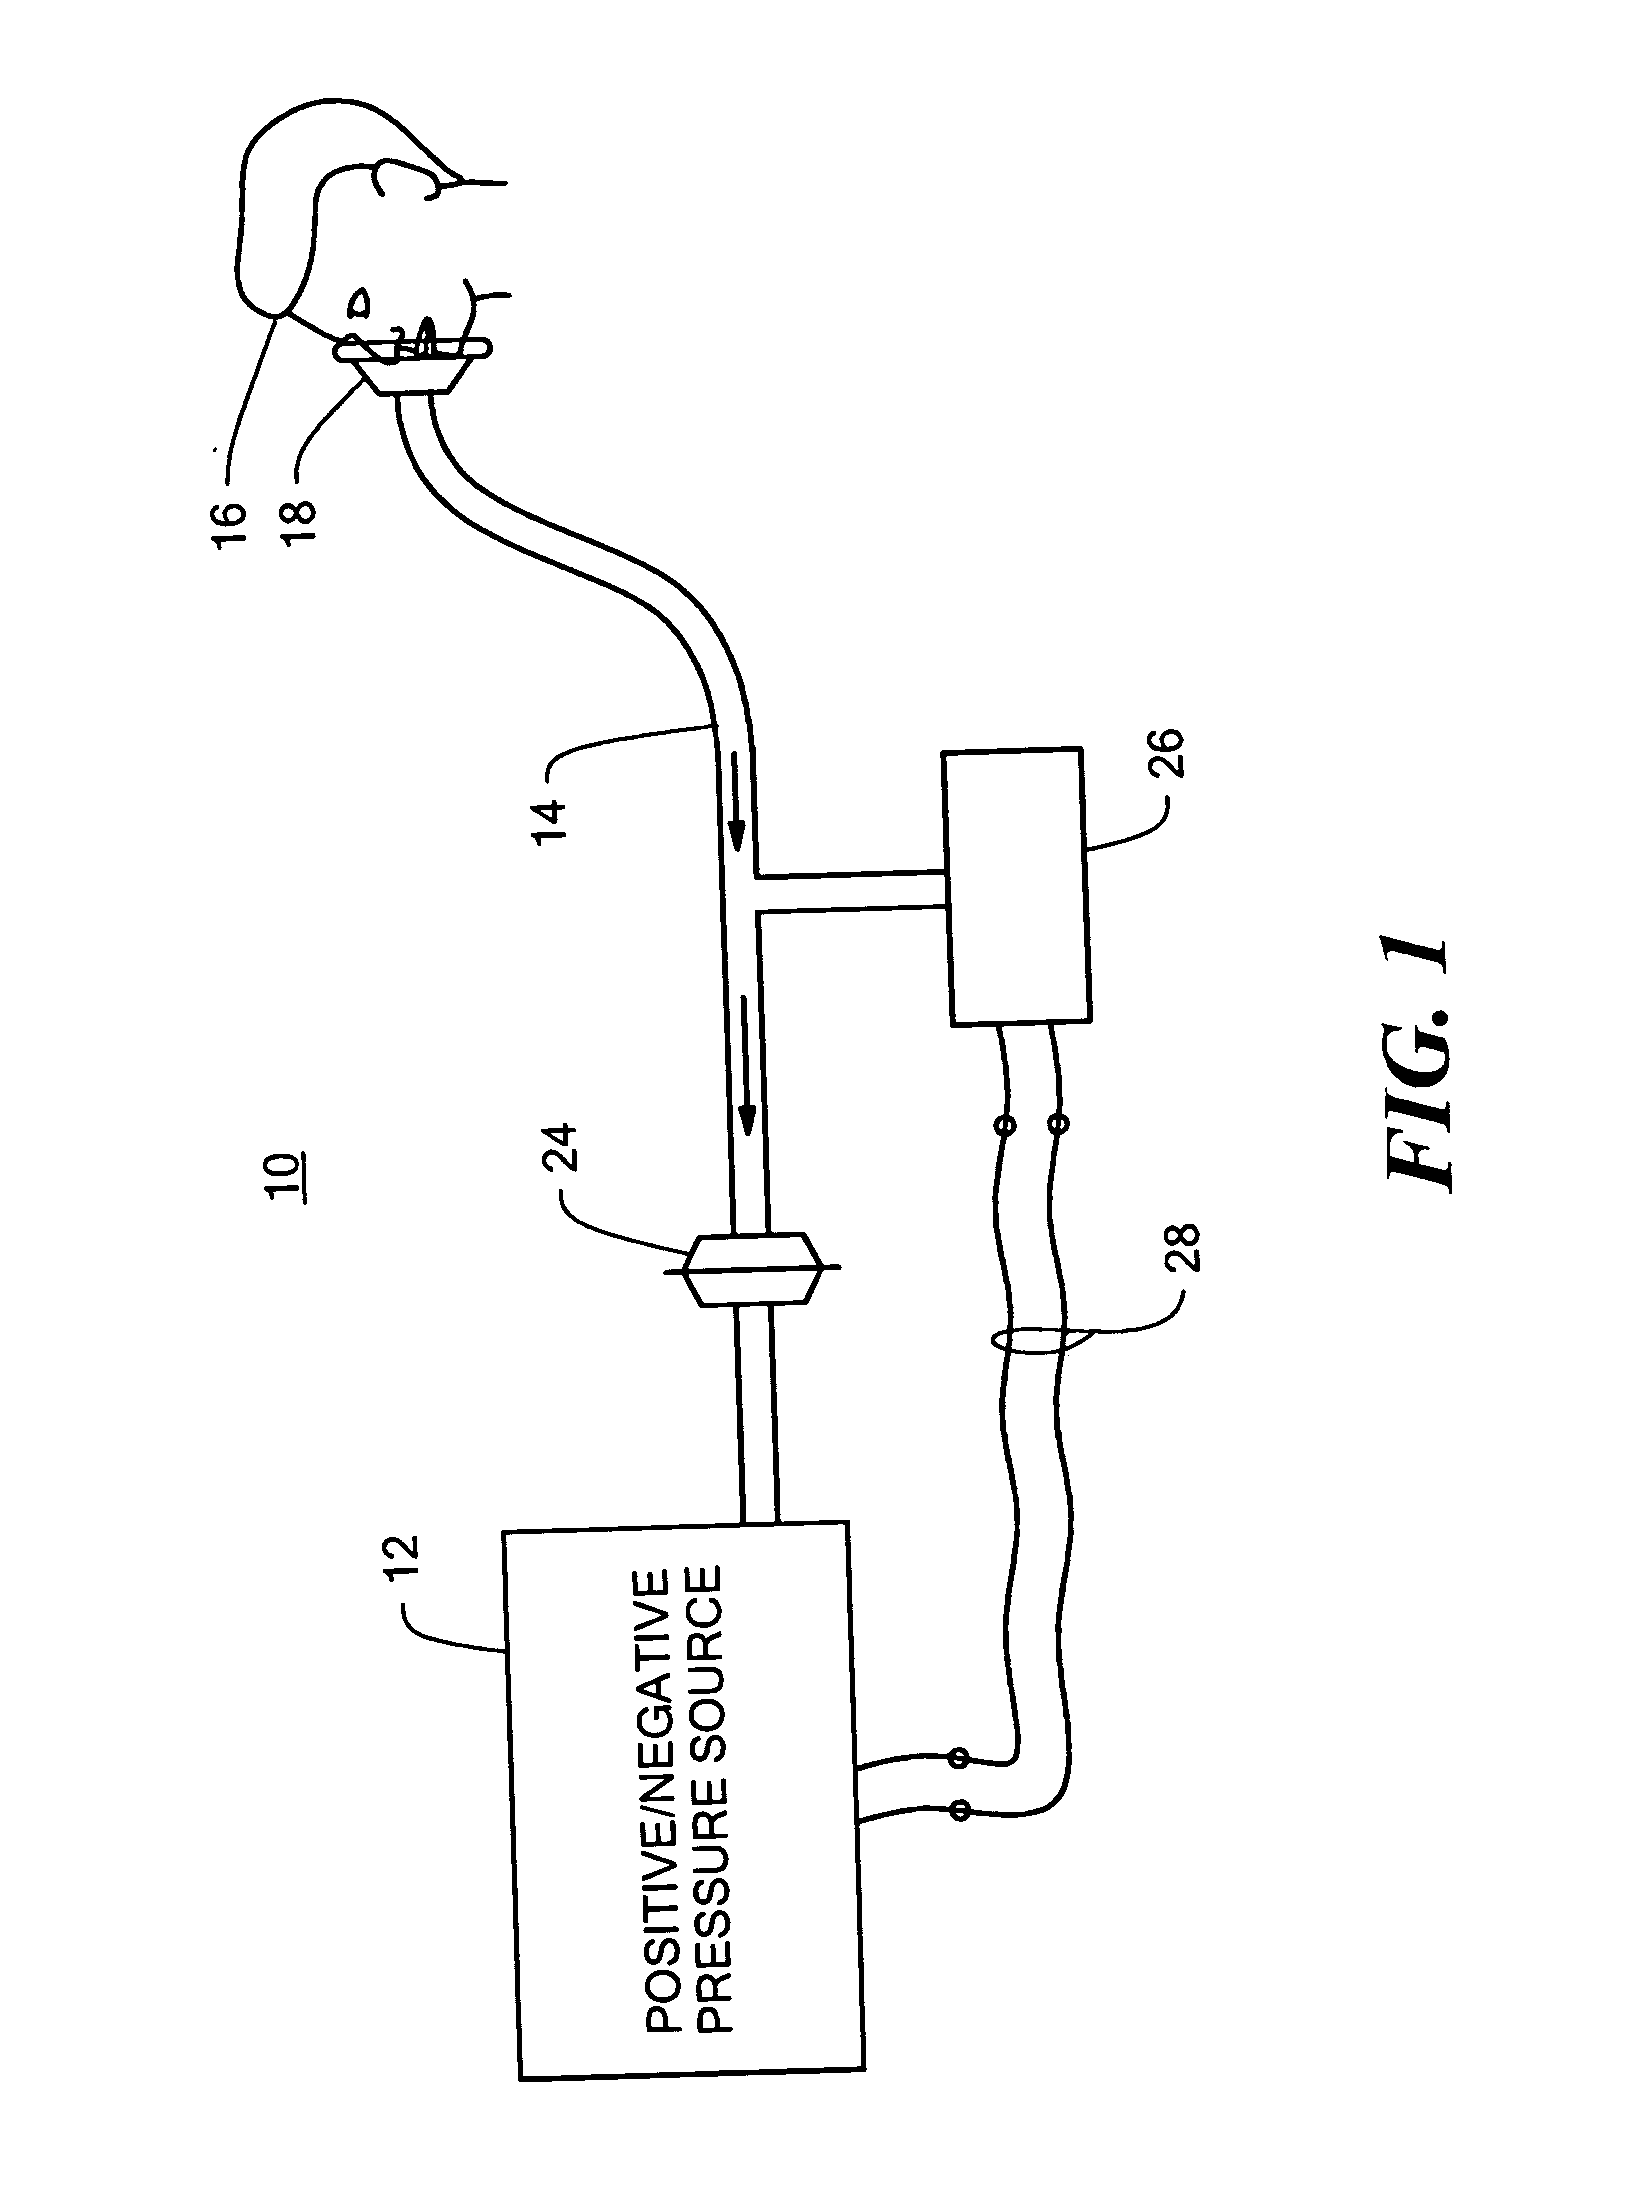 Insufflation-exsufflation system for removal of broncho-pulmonary secretions with automatic triggering of inhalation phase